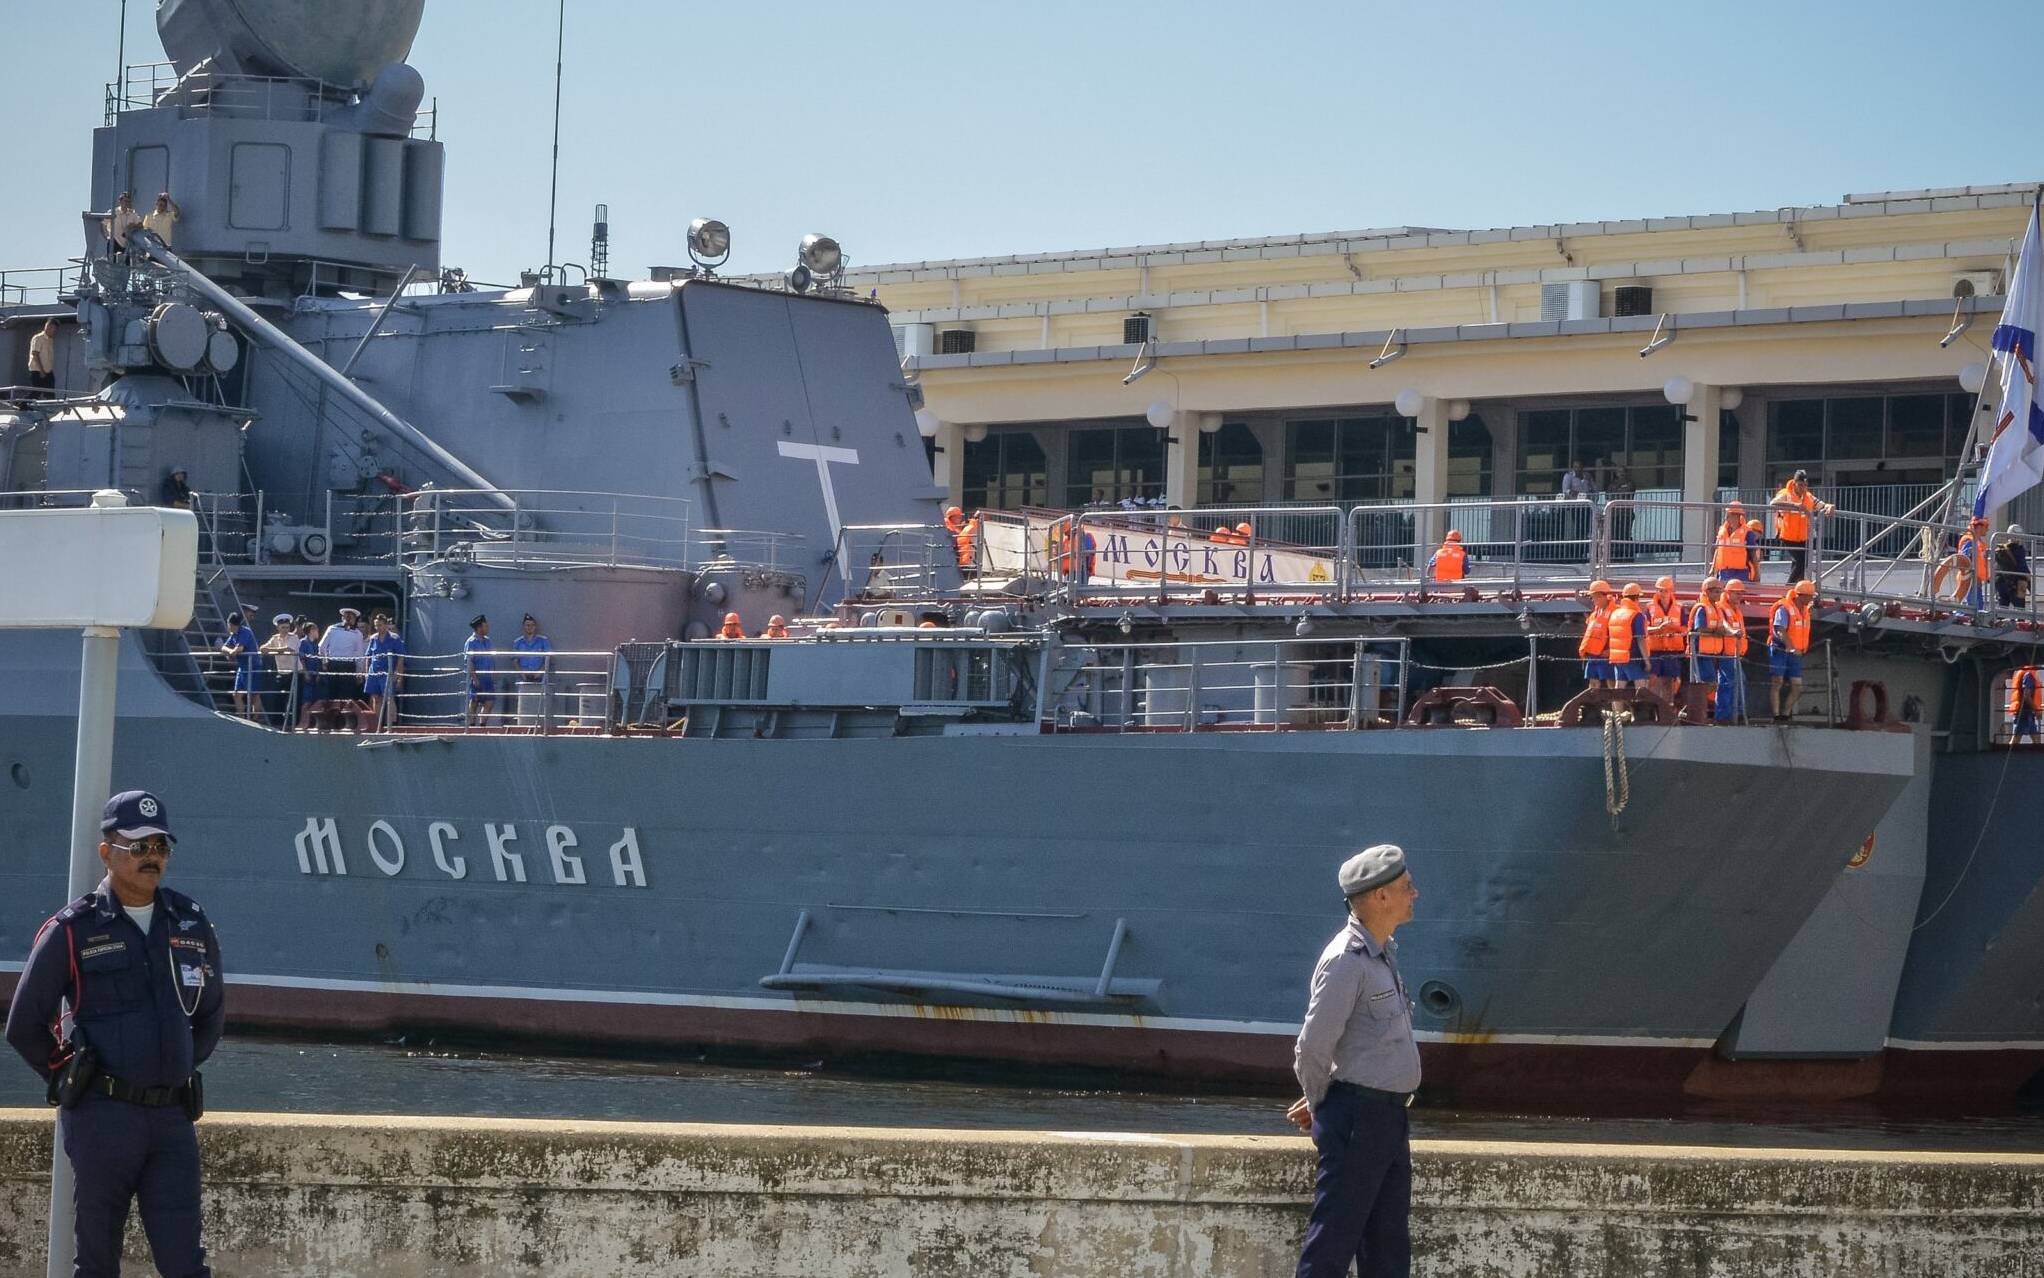 (FILES) In this file photo taken on August 3, 2013 Cuban police stand watch as the "Moskva" Russian guided missile cruiser moors at Havana's harbour. - The Pentagon on May 6, 2022, denied  reports that it helped Ukrainian forces sink the Russian warship Moskva in the Black Sea last month in a stunning setback for Moscow's invasion. "We did not provide Ukraine with specific targeting information for the Moskva," Pentagon spokesman John Kirby said in a statement. (Photo by Adalberto ROQUE / AFP)